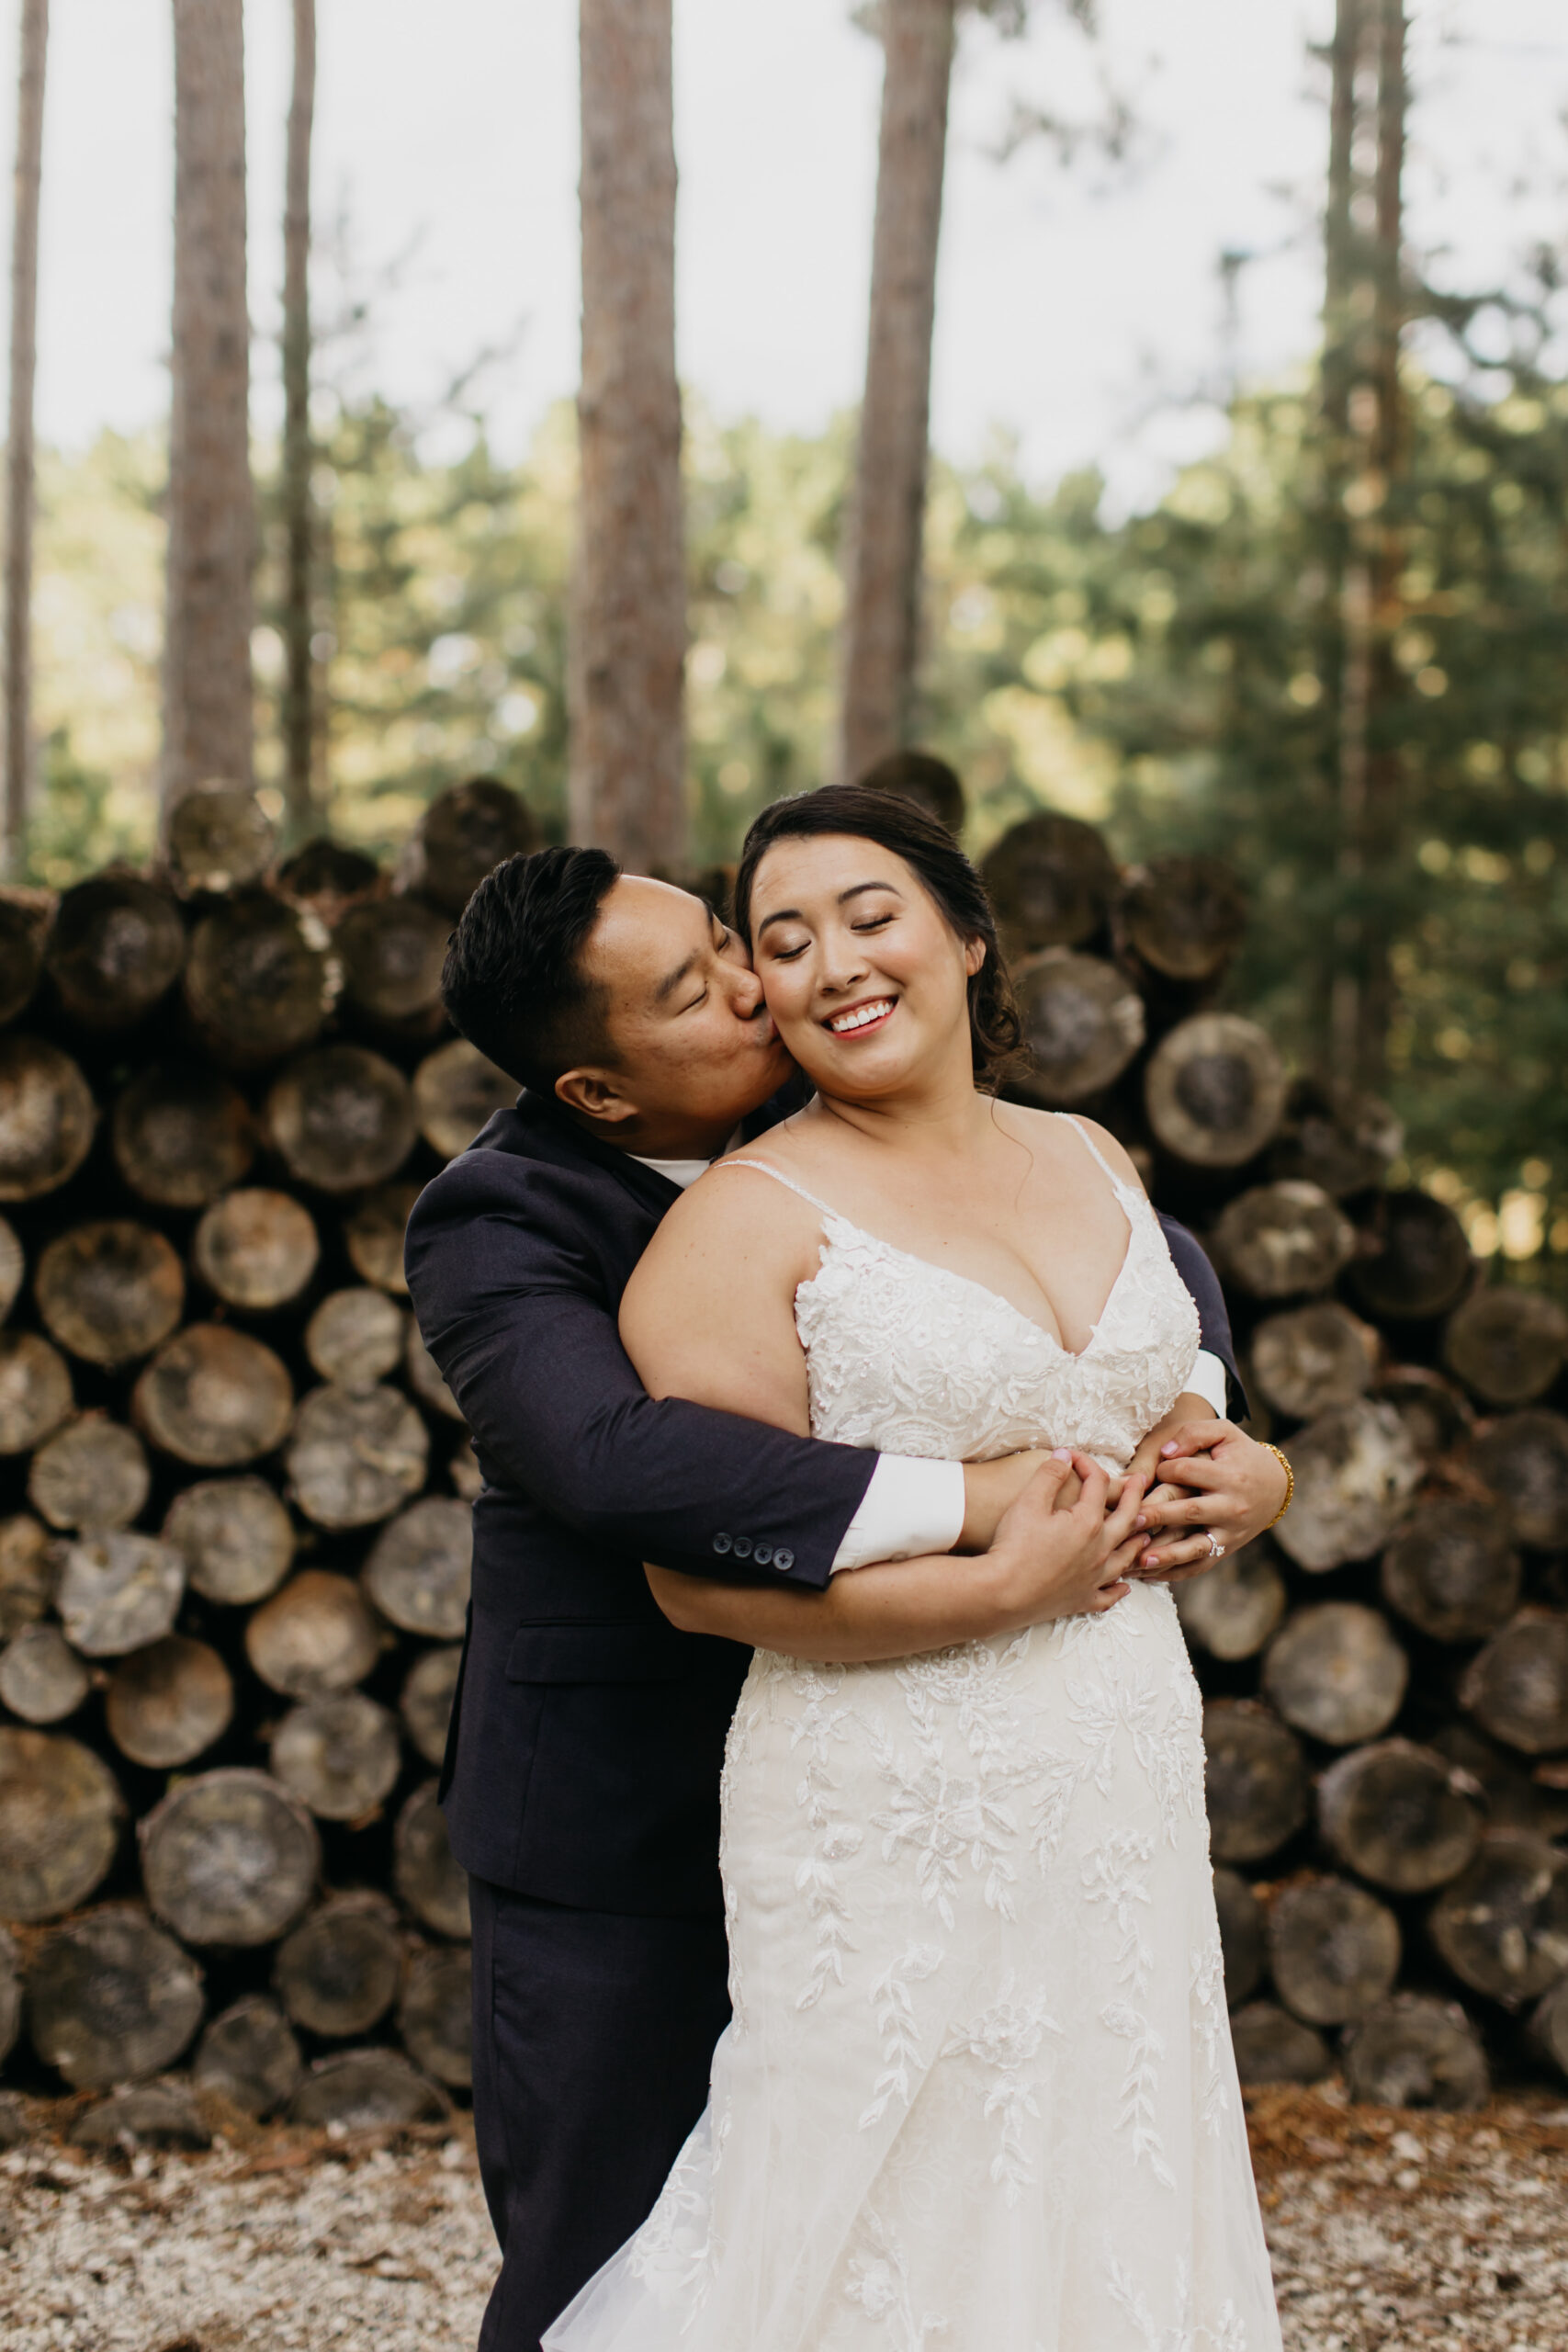 A lovely photo of the newlyweds with pine trees as the background